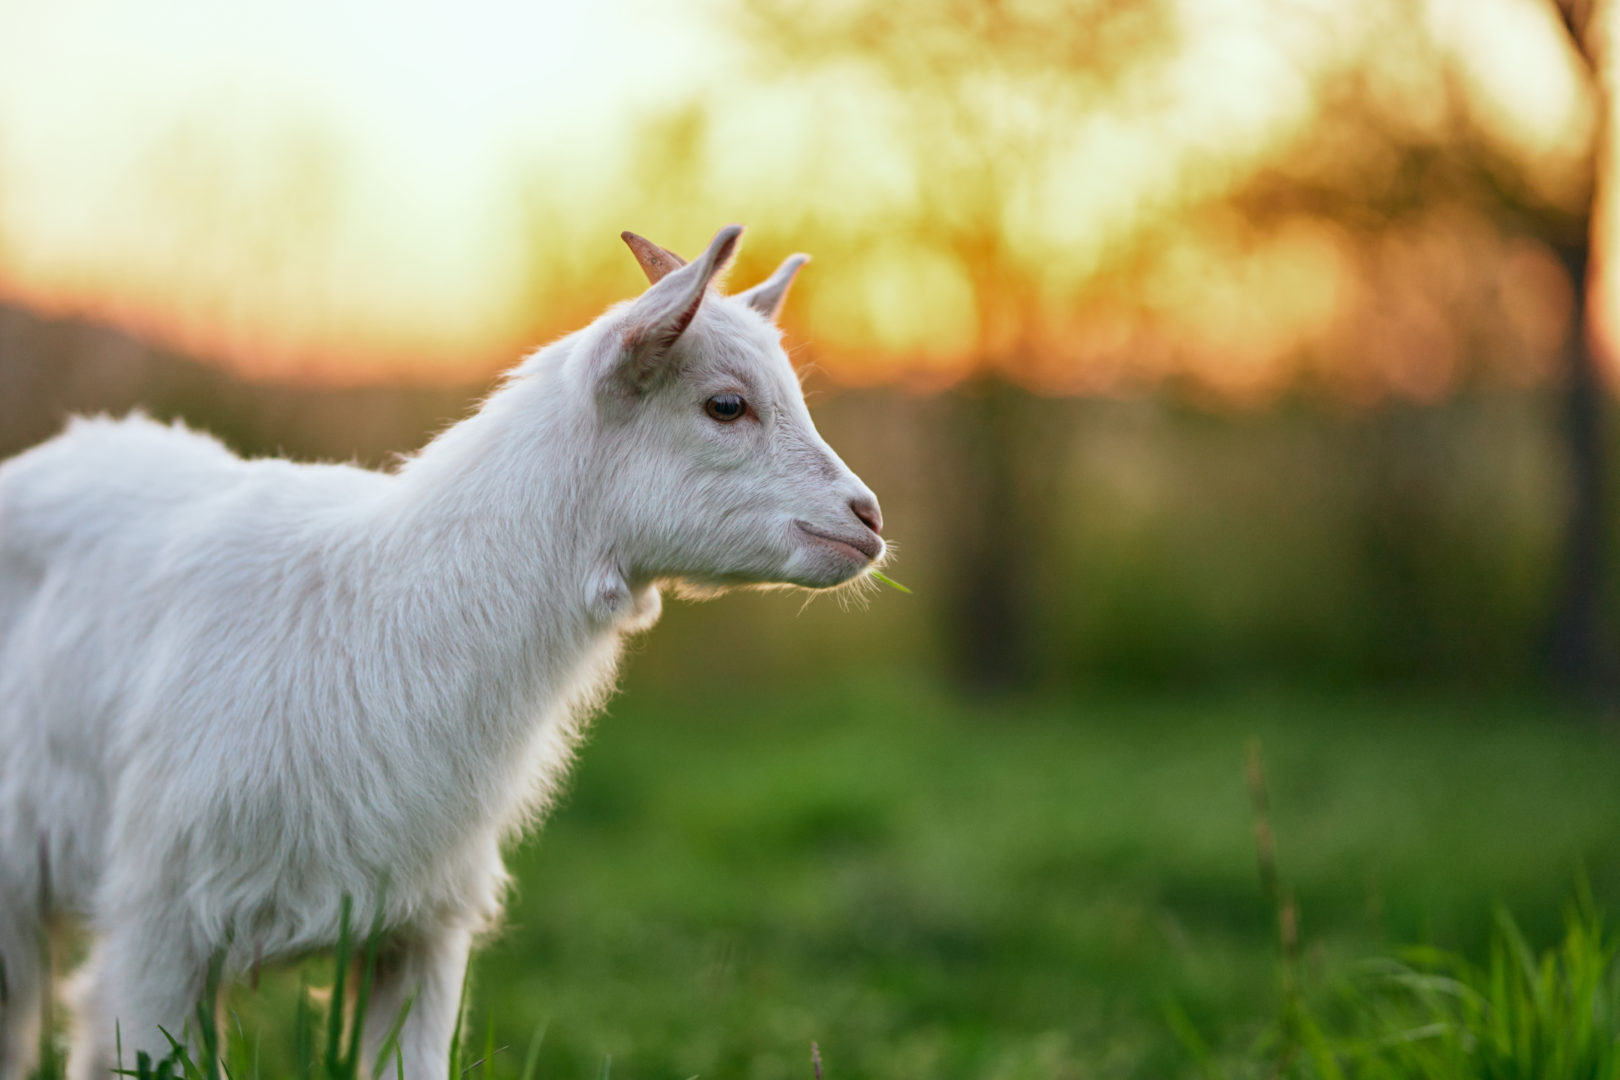 Baby goat standing in field at sunset